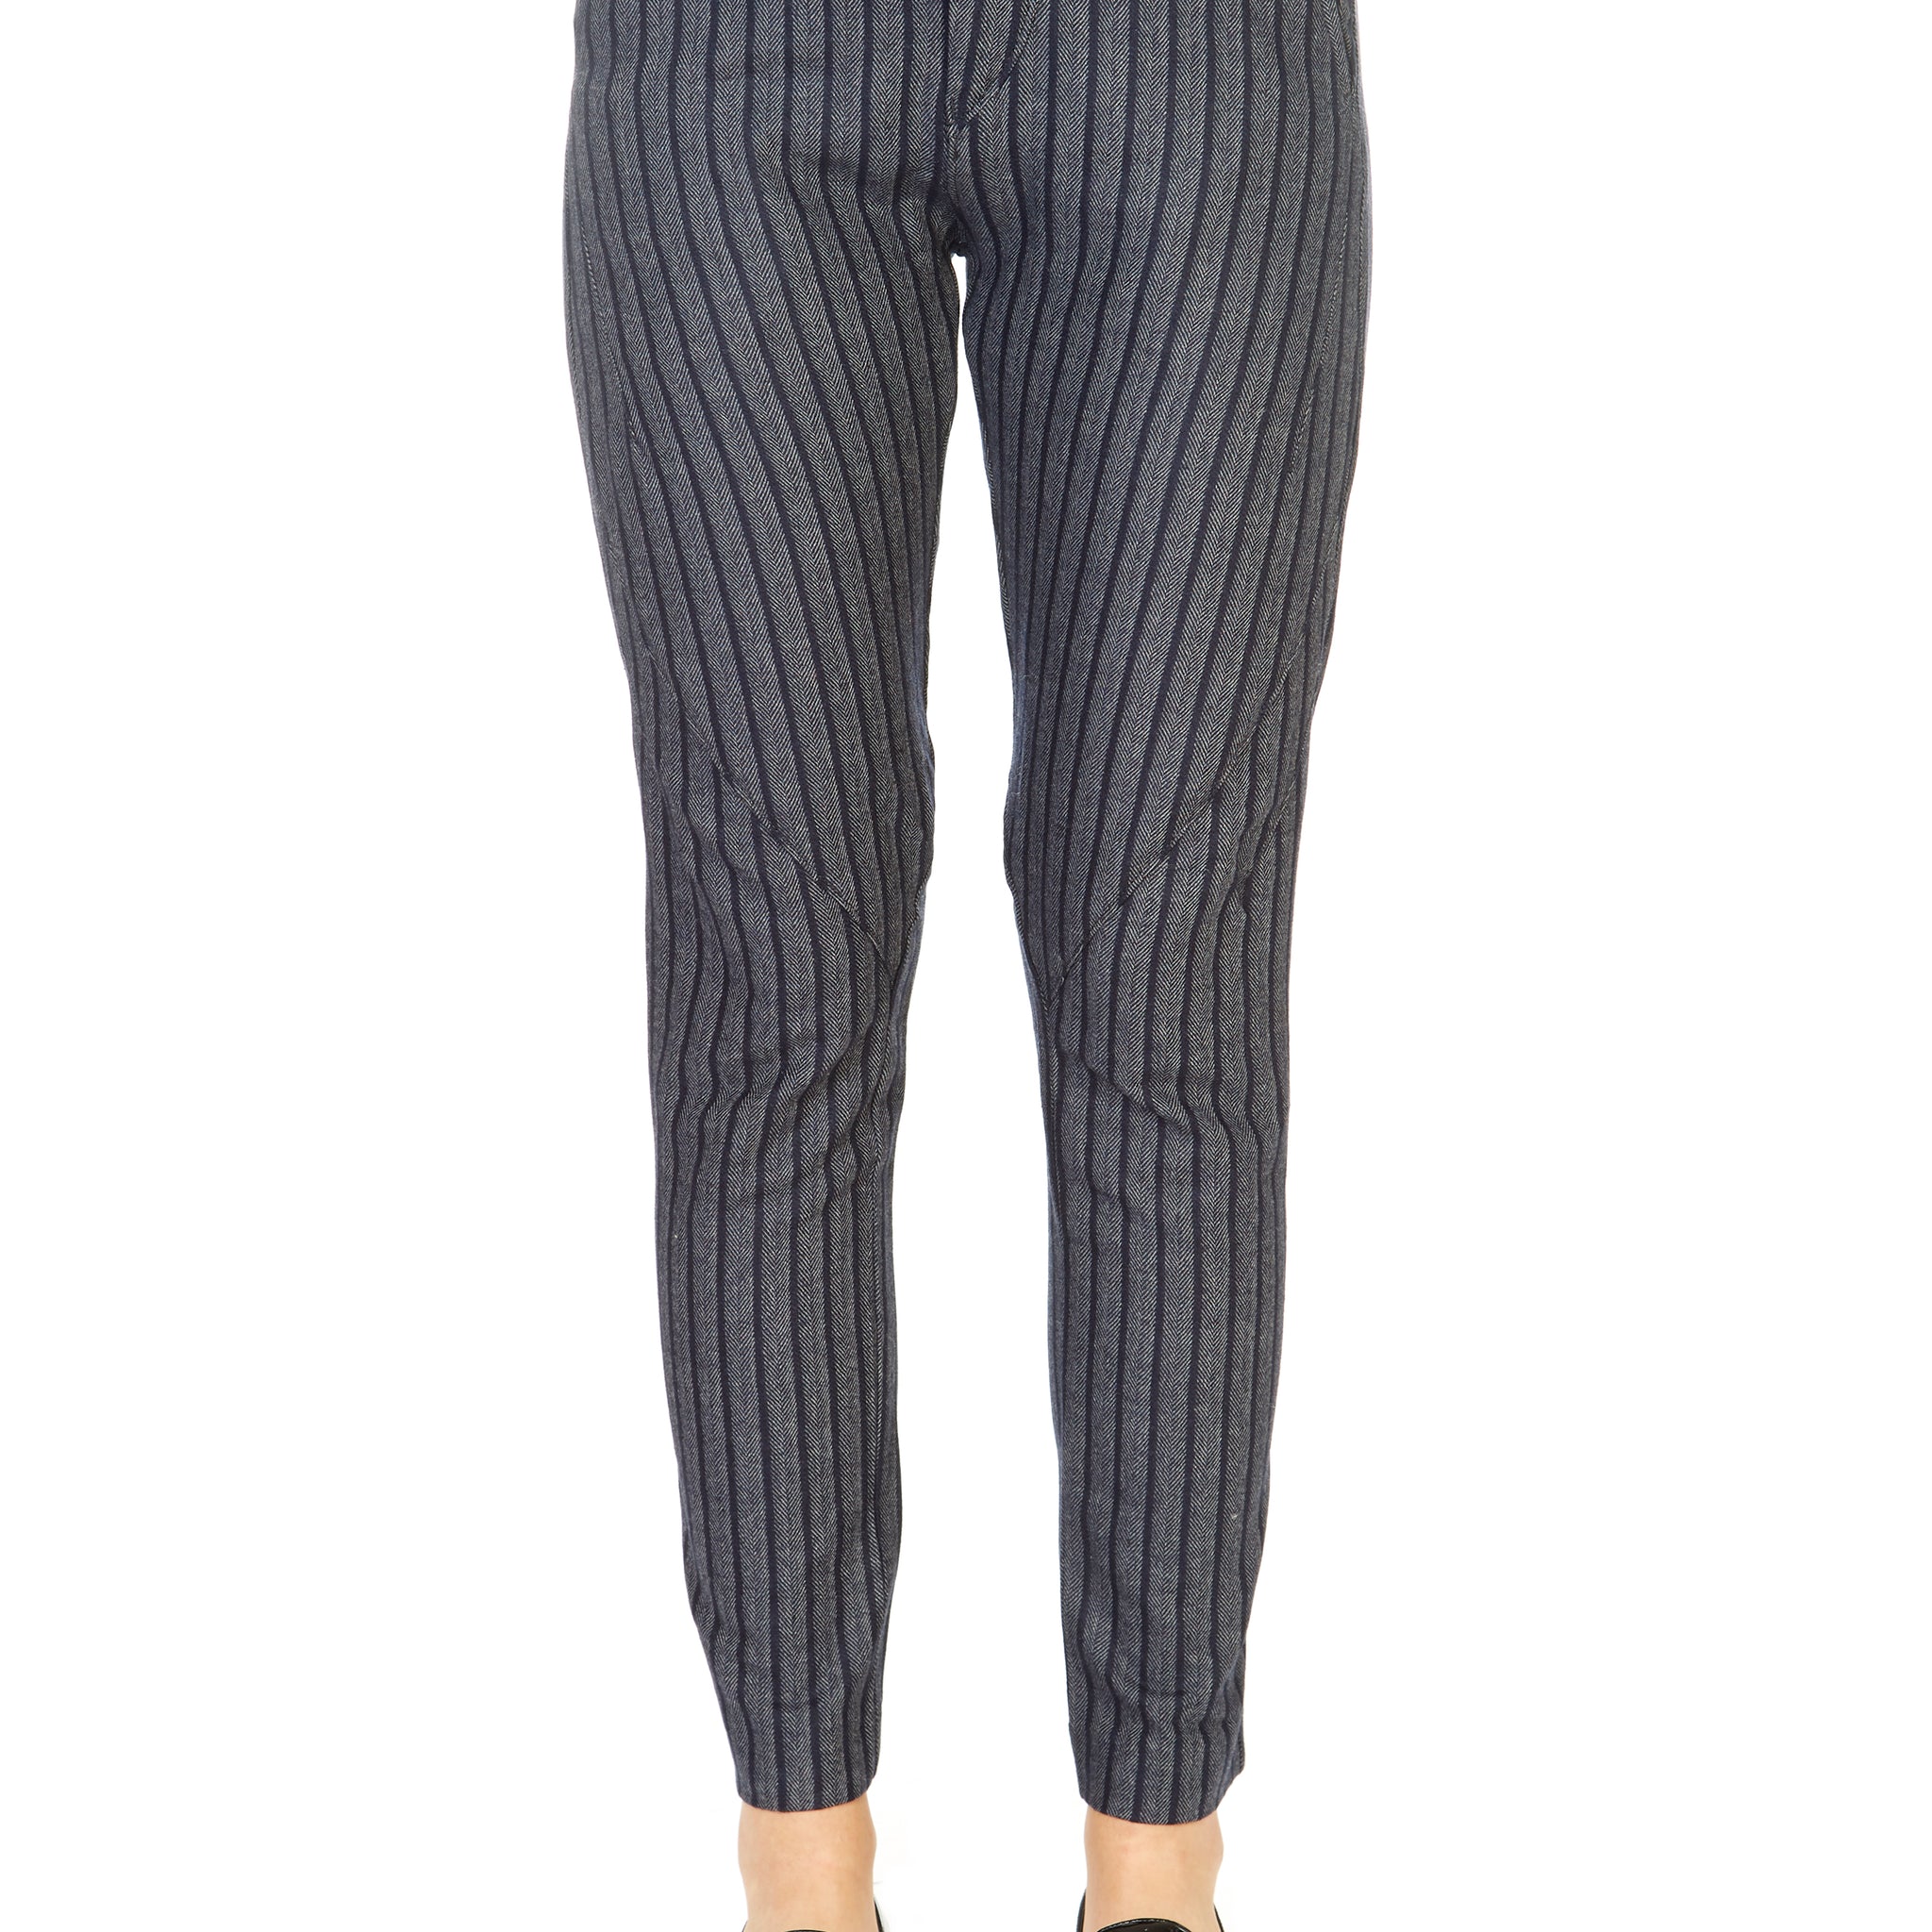 'In Motion' Grey Striped Trousers - Jessimara